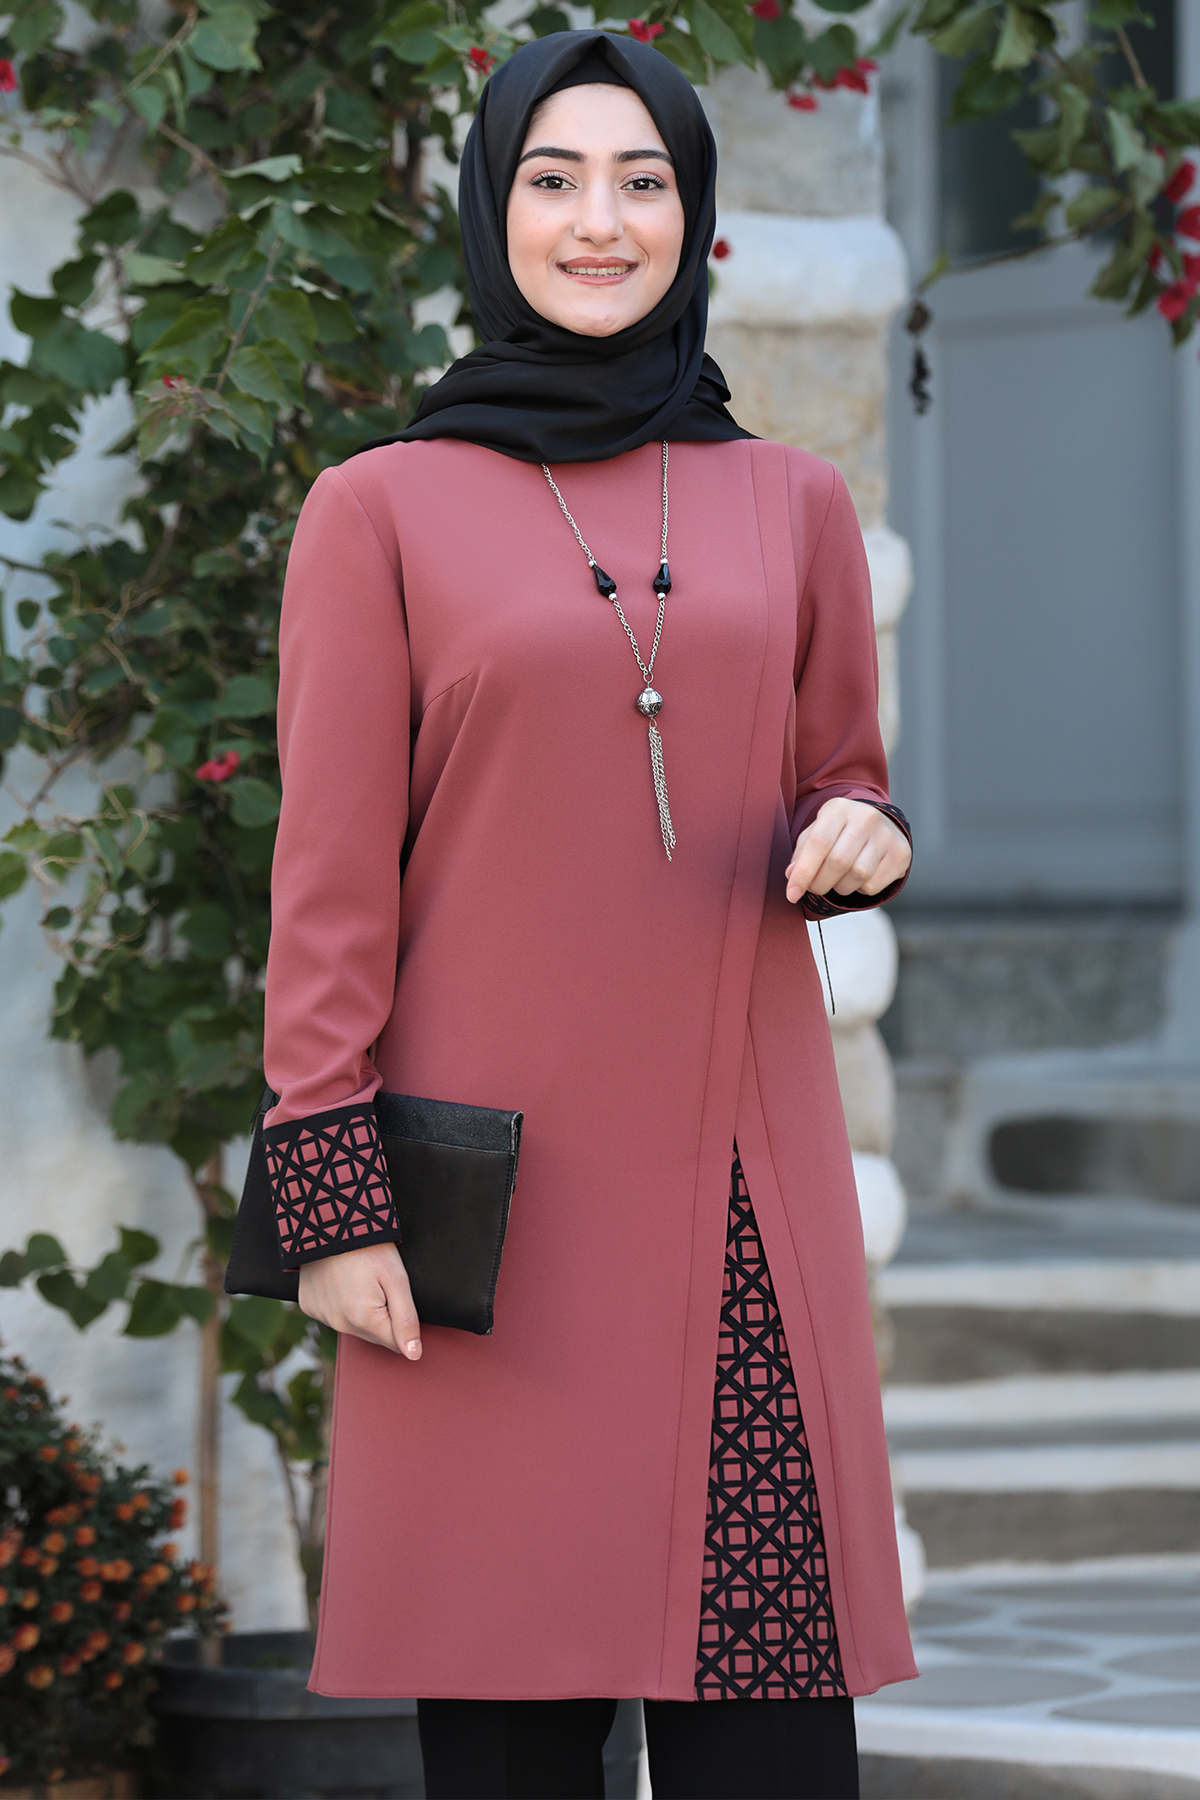 Dusty Rose - Crew neck - Evening Suit - Unlined - Islamic Modest ...